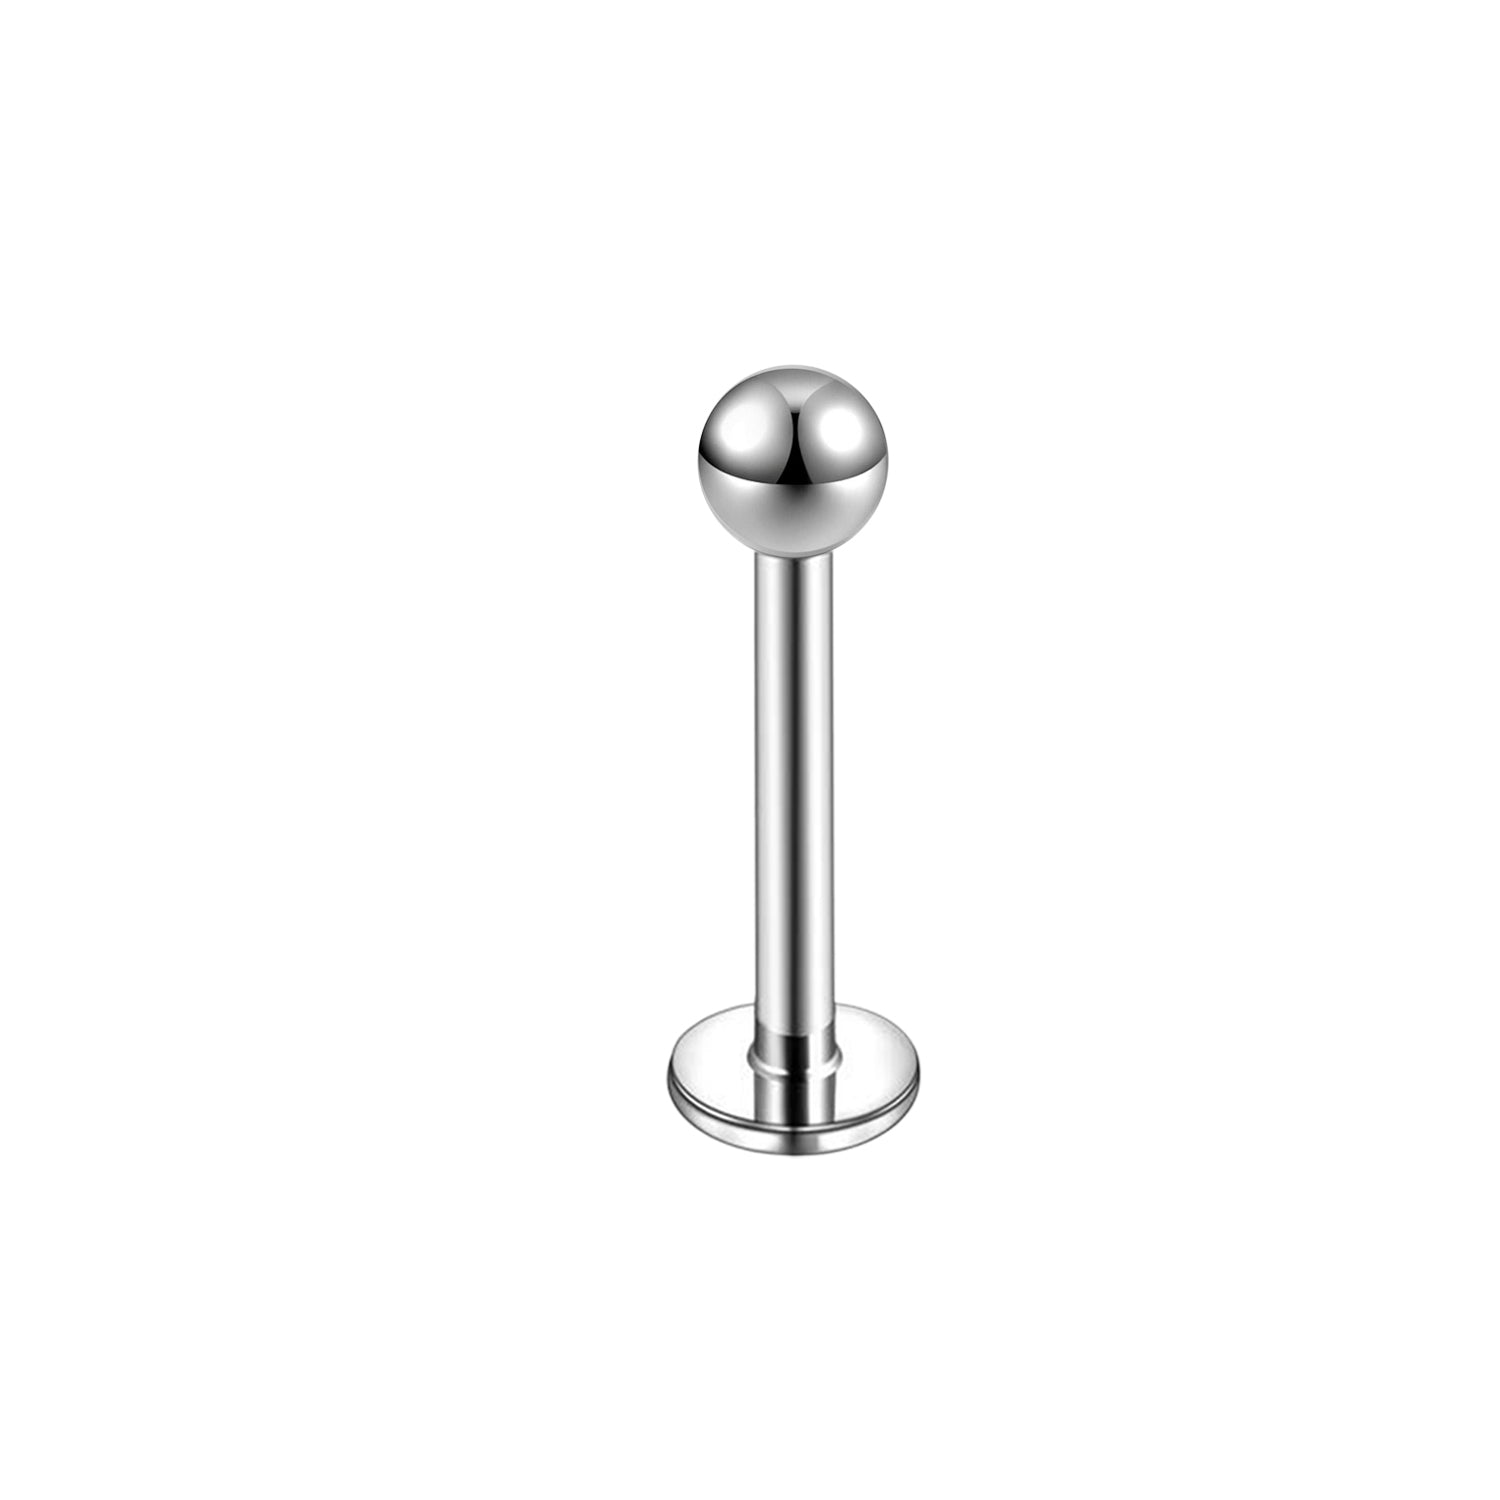 16g-push-in-stainless-steel-ball-labret-rings-conch-tragus-helix-monroe-lip-piercing